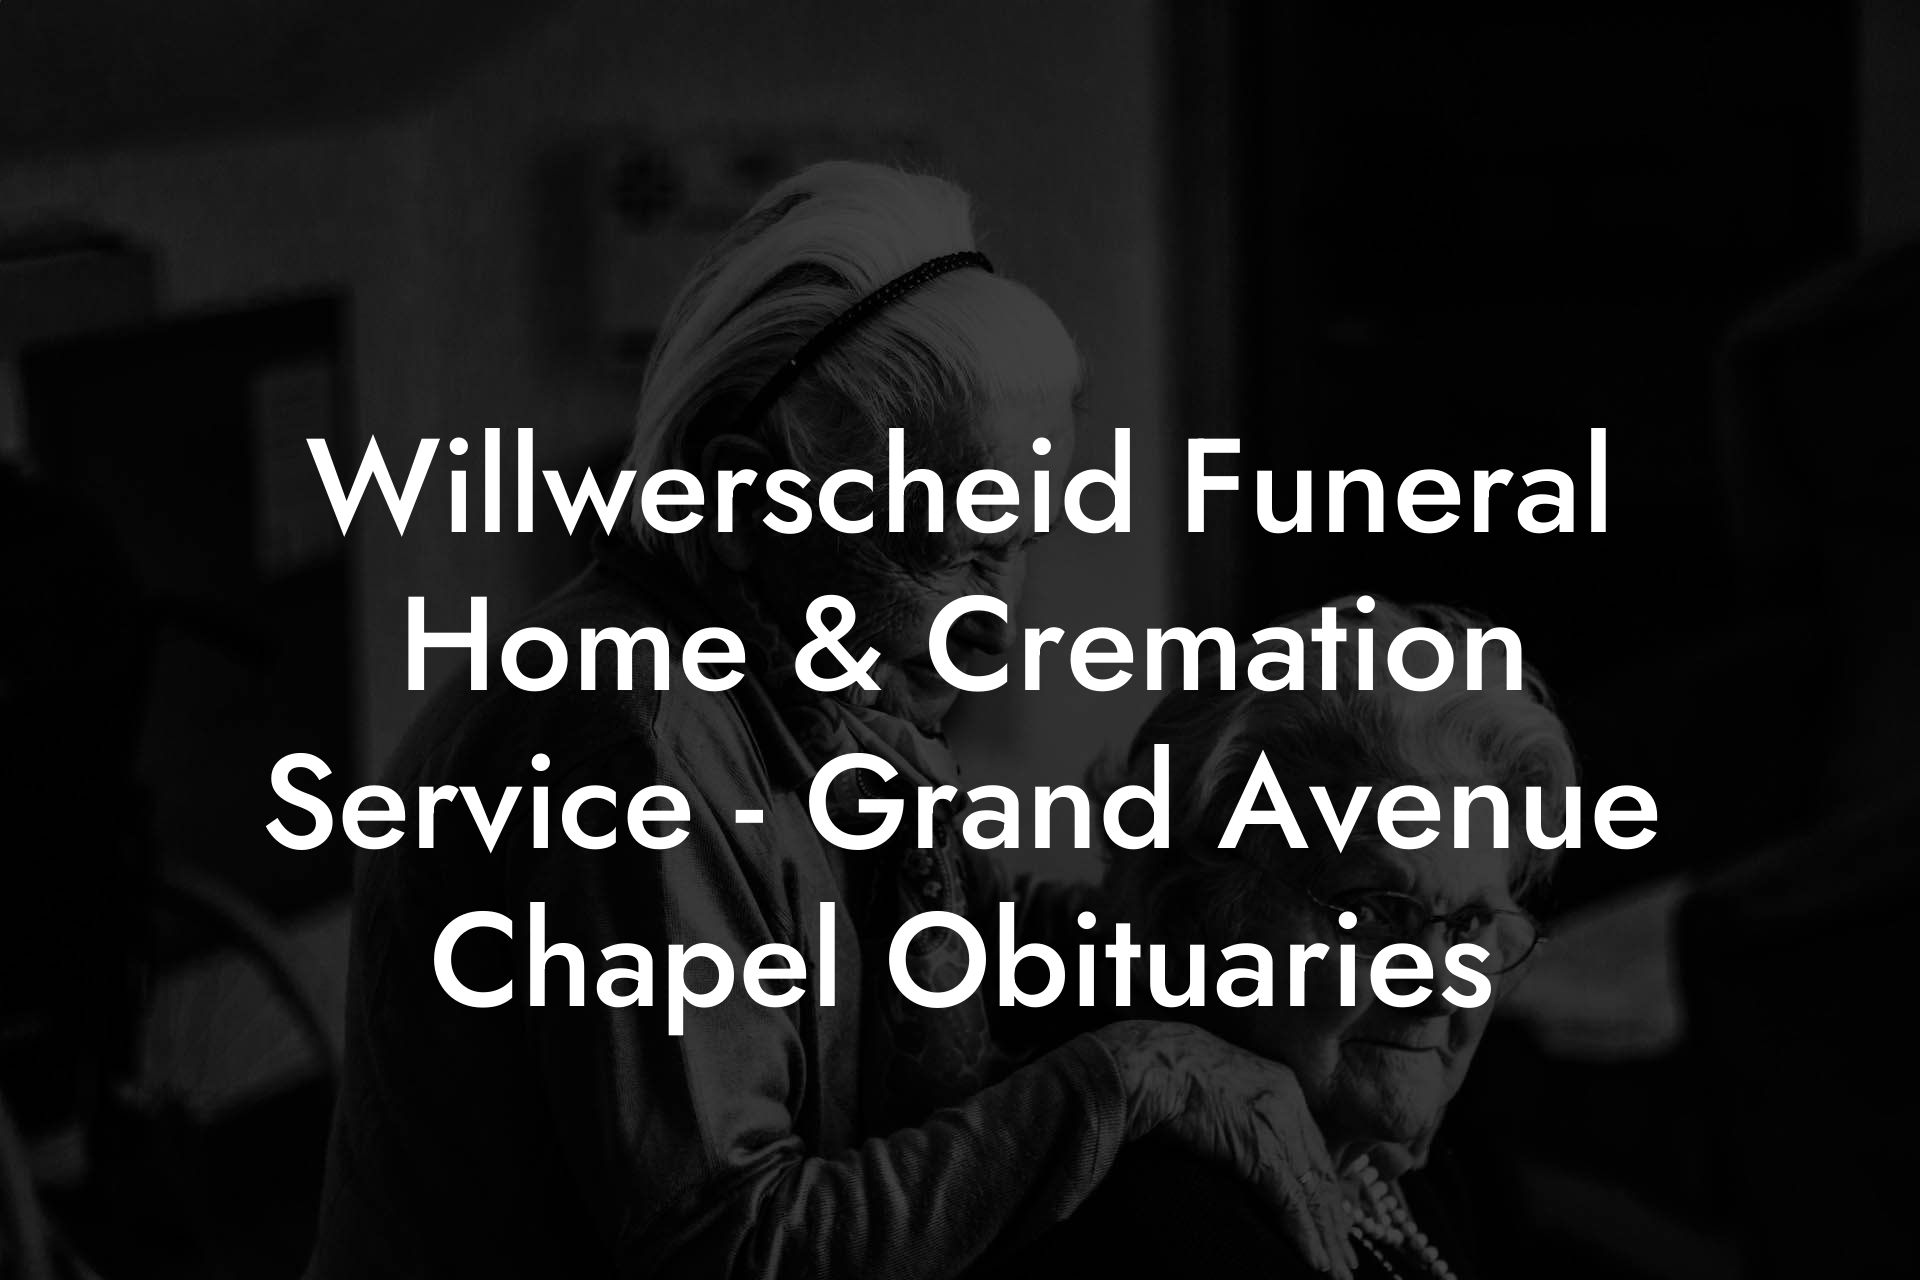 Willwerscheid Funeral Home & Cremation Service - Grand Avenue Chapel Obituaries